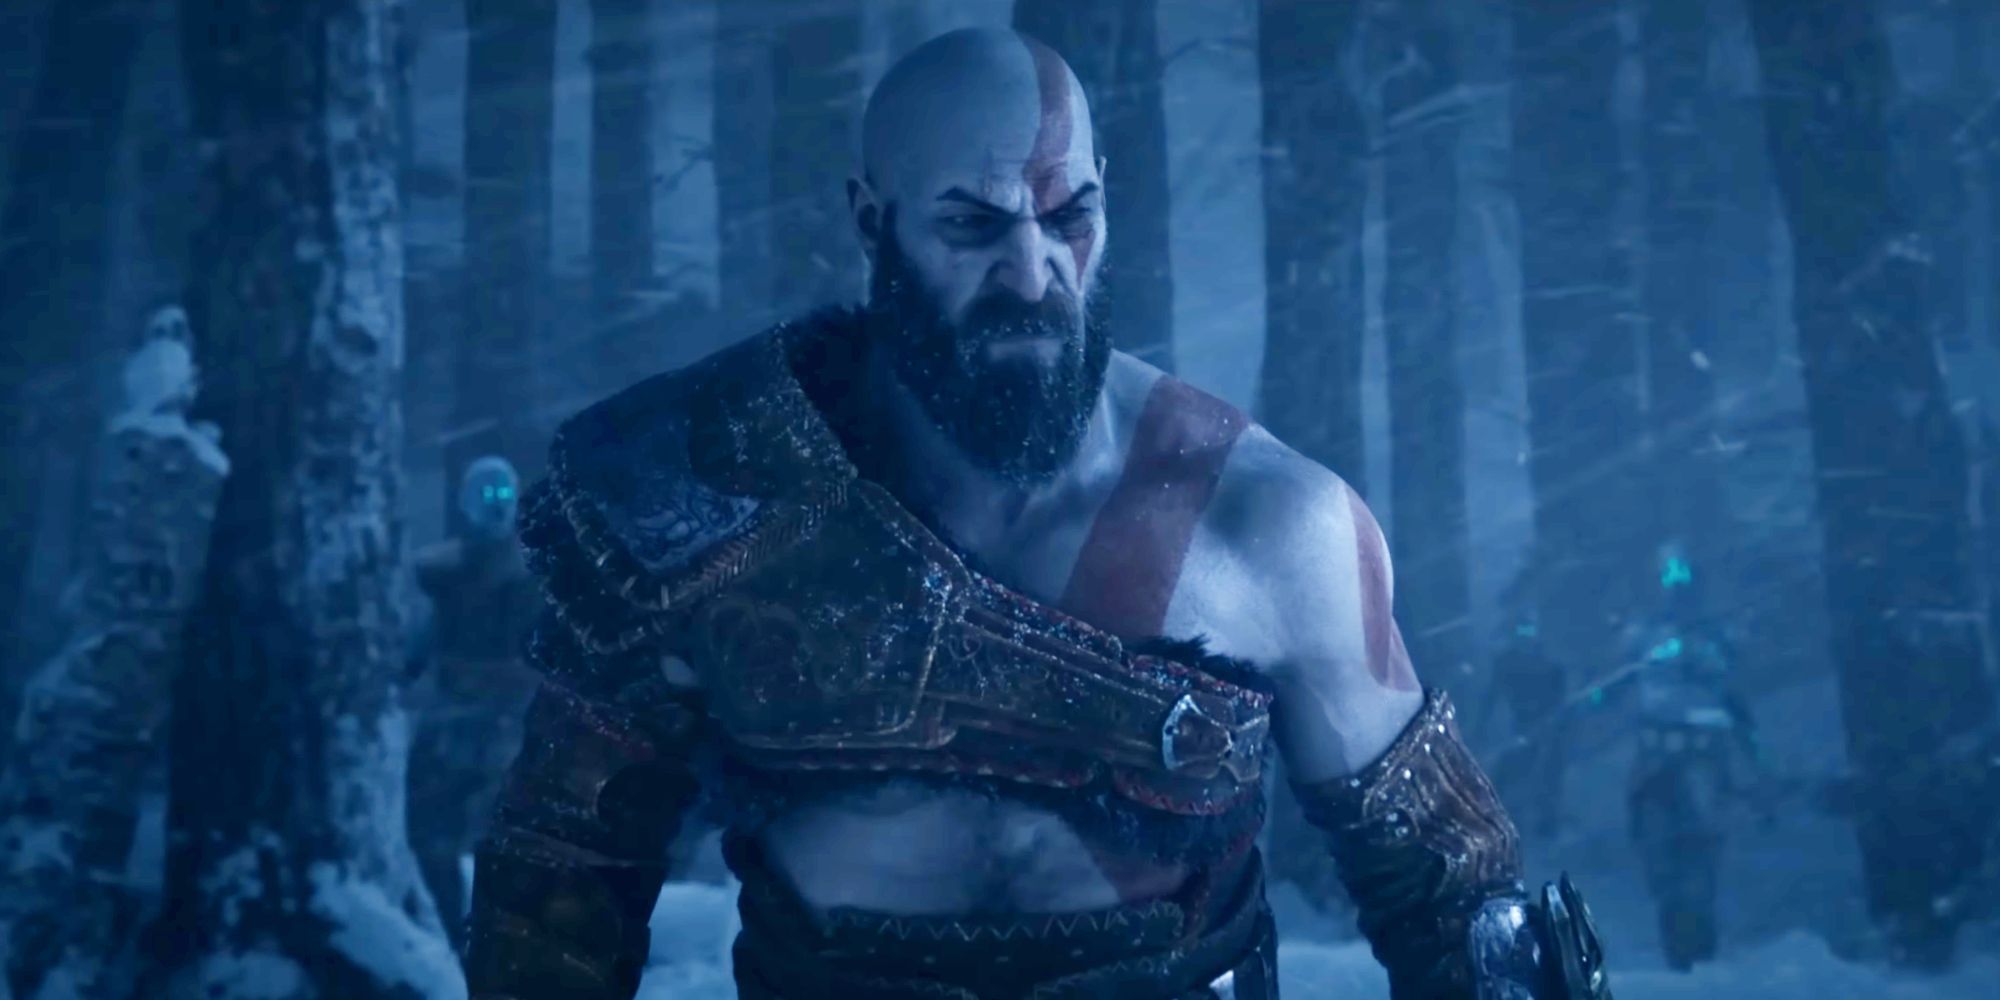 All The Latest God Of War News, Reviews, Trailers & Guides